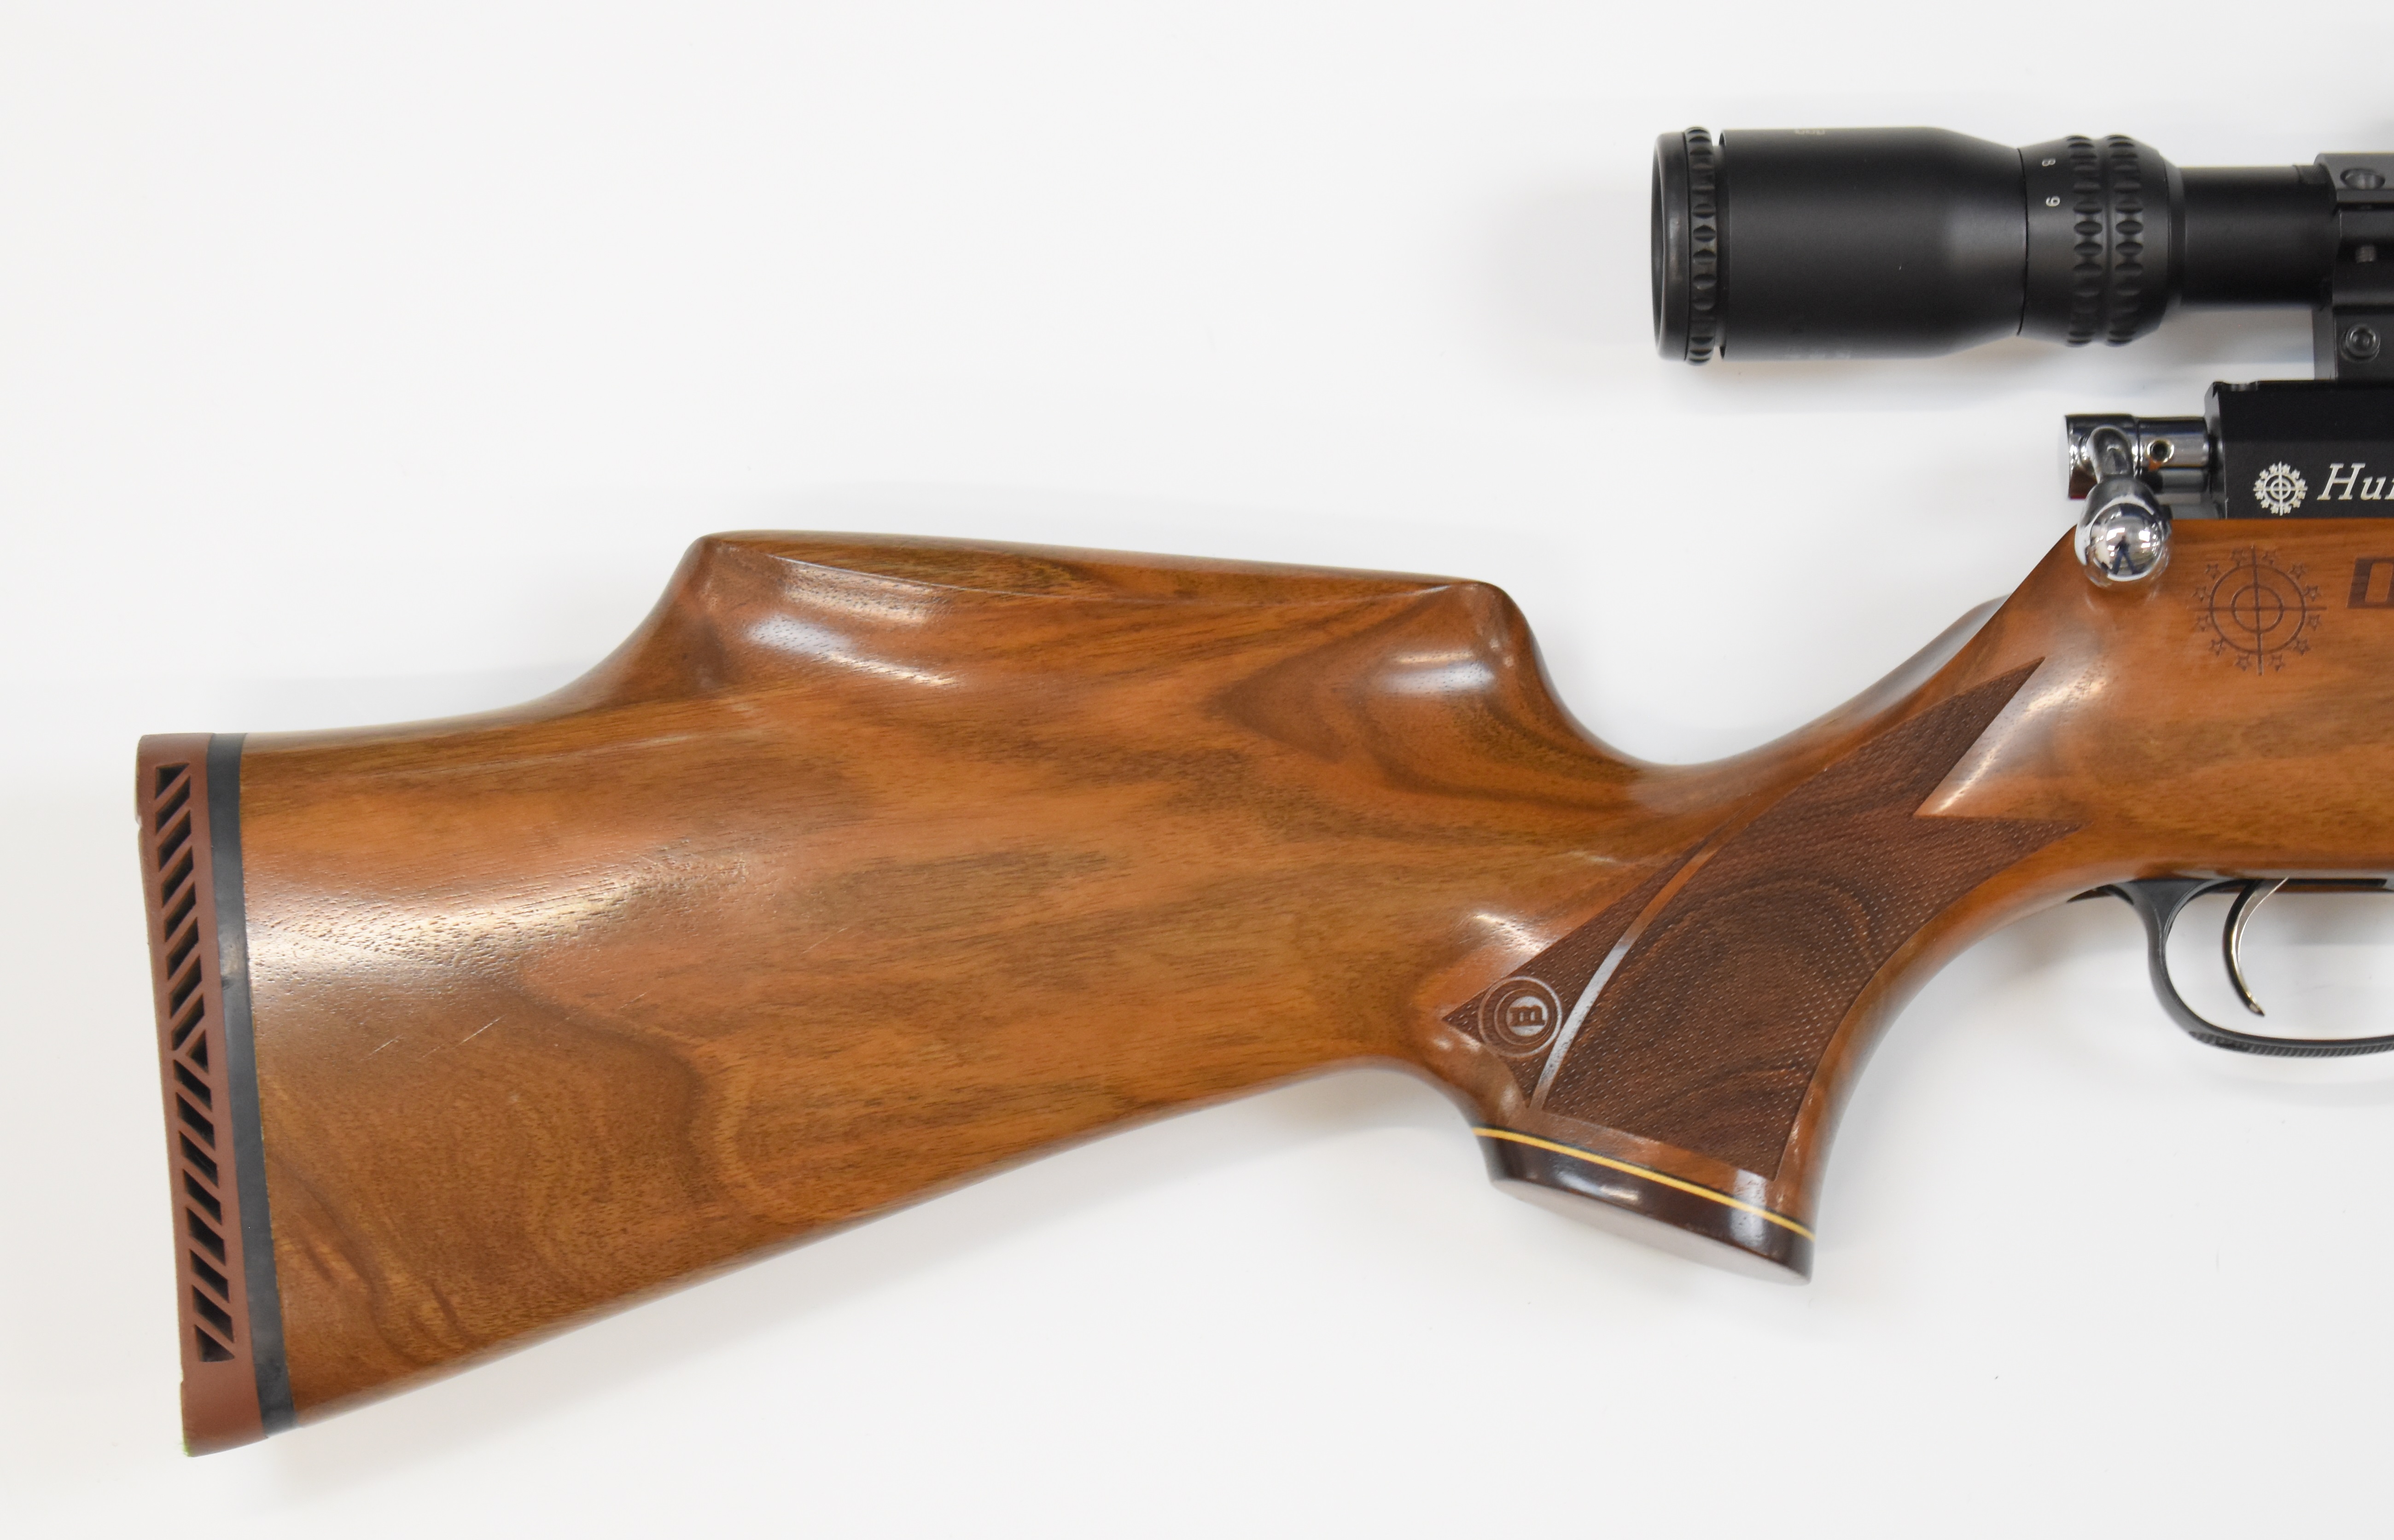 Daystate Huntsman Classic .177 PCP air rifle with monogrammed and chequered semi-pistol grip, - Image 3 of 9